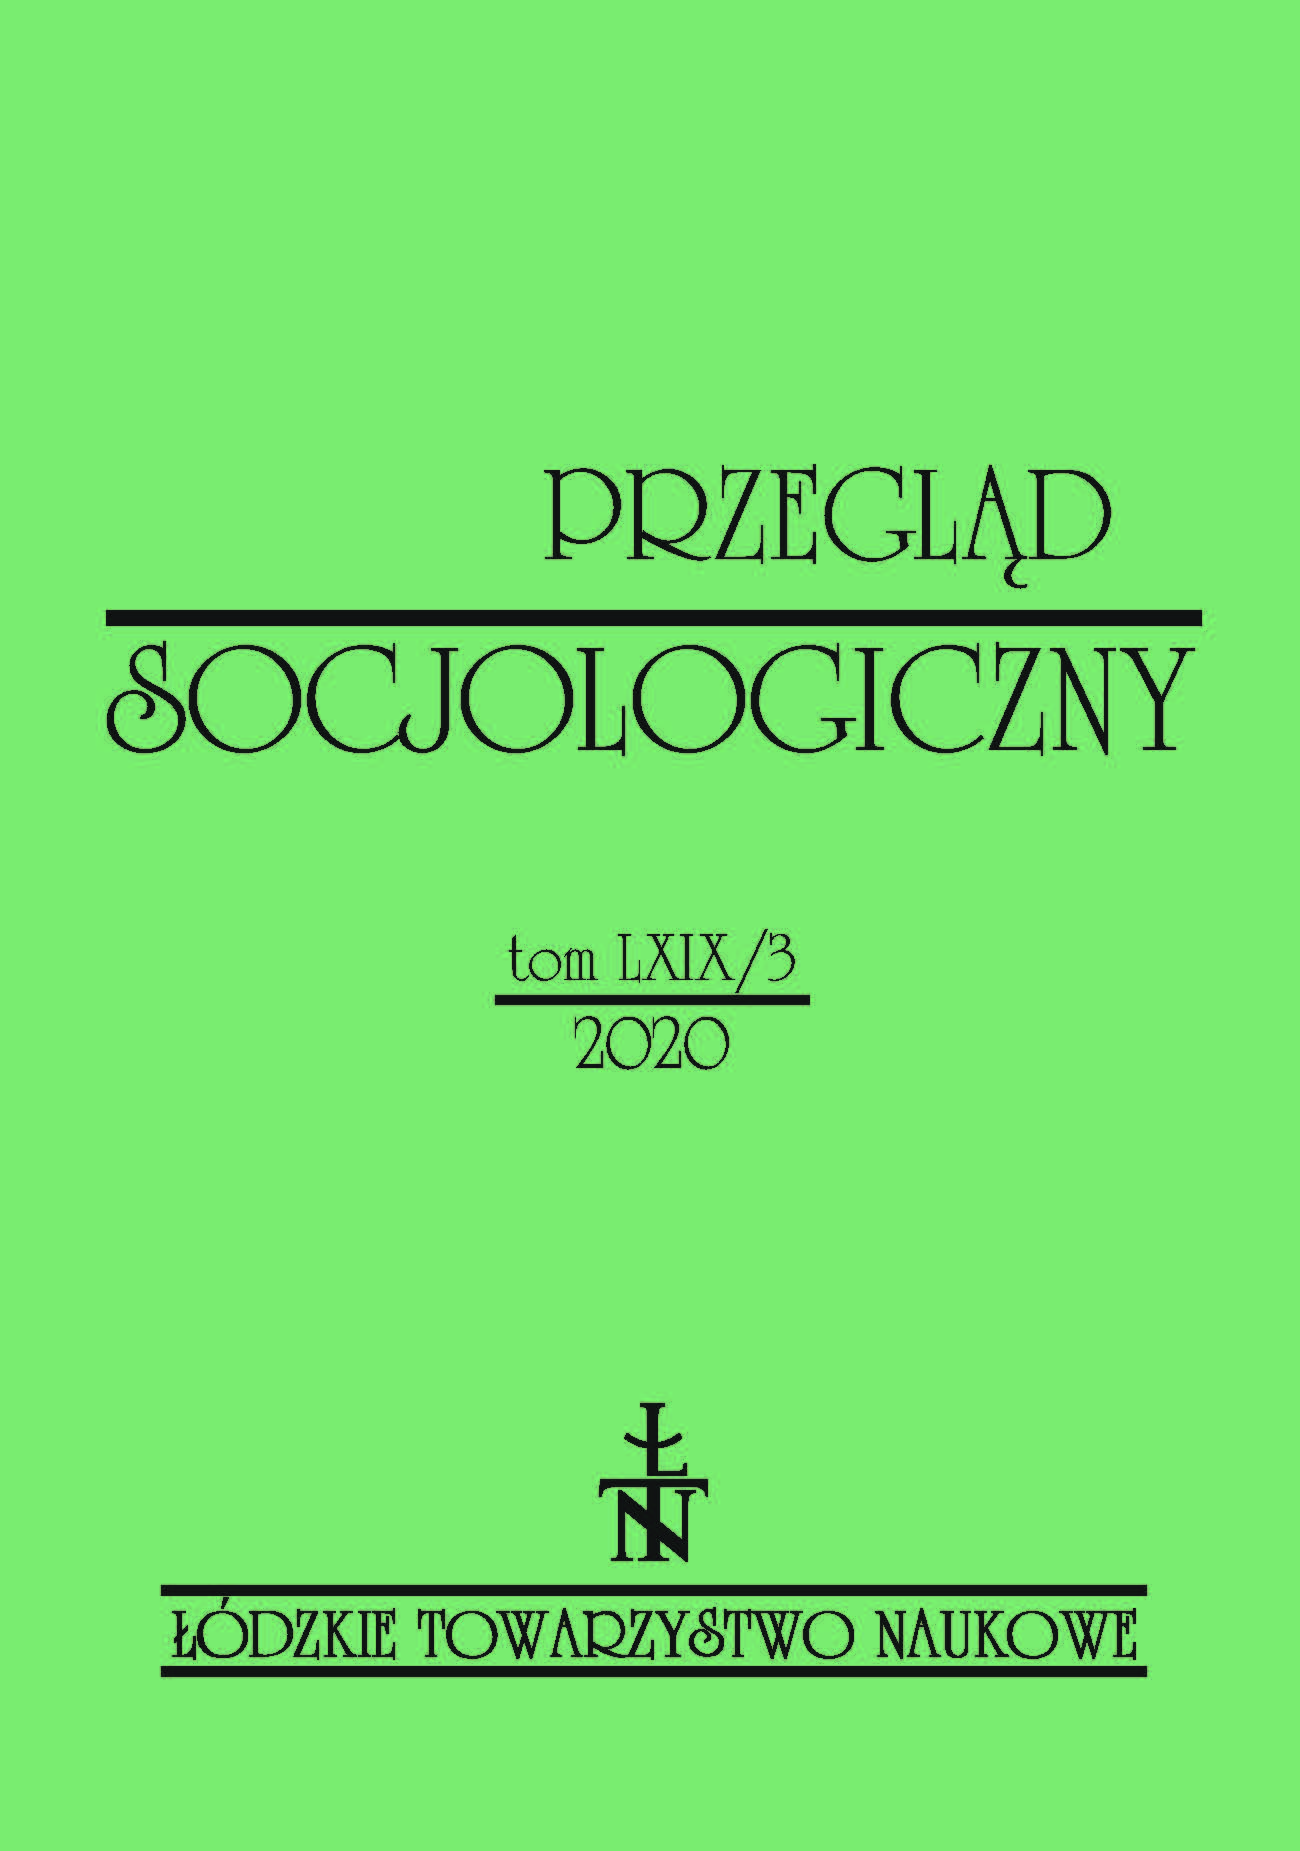 Ethics in the book series „Niezbędnik badacza”. Ethical issues in textbooks for qualitative research methods Cover Image